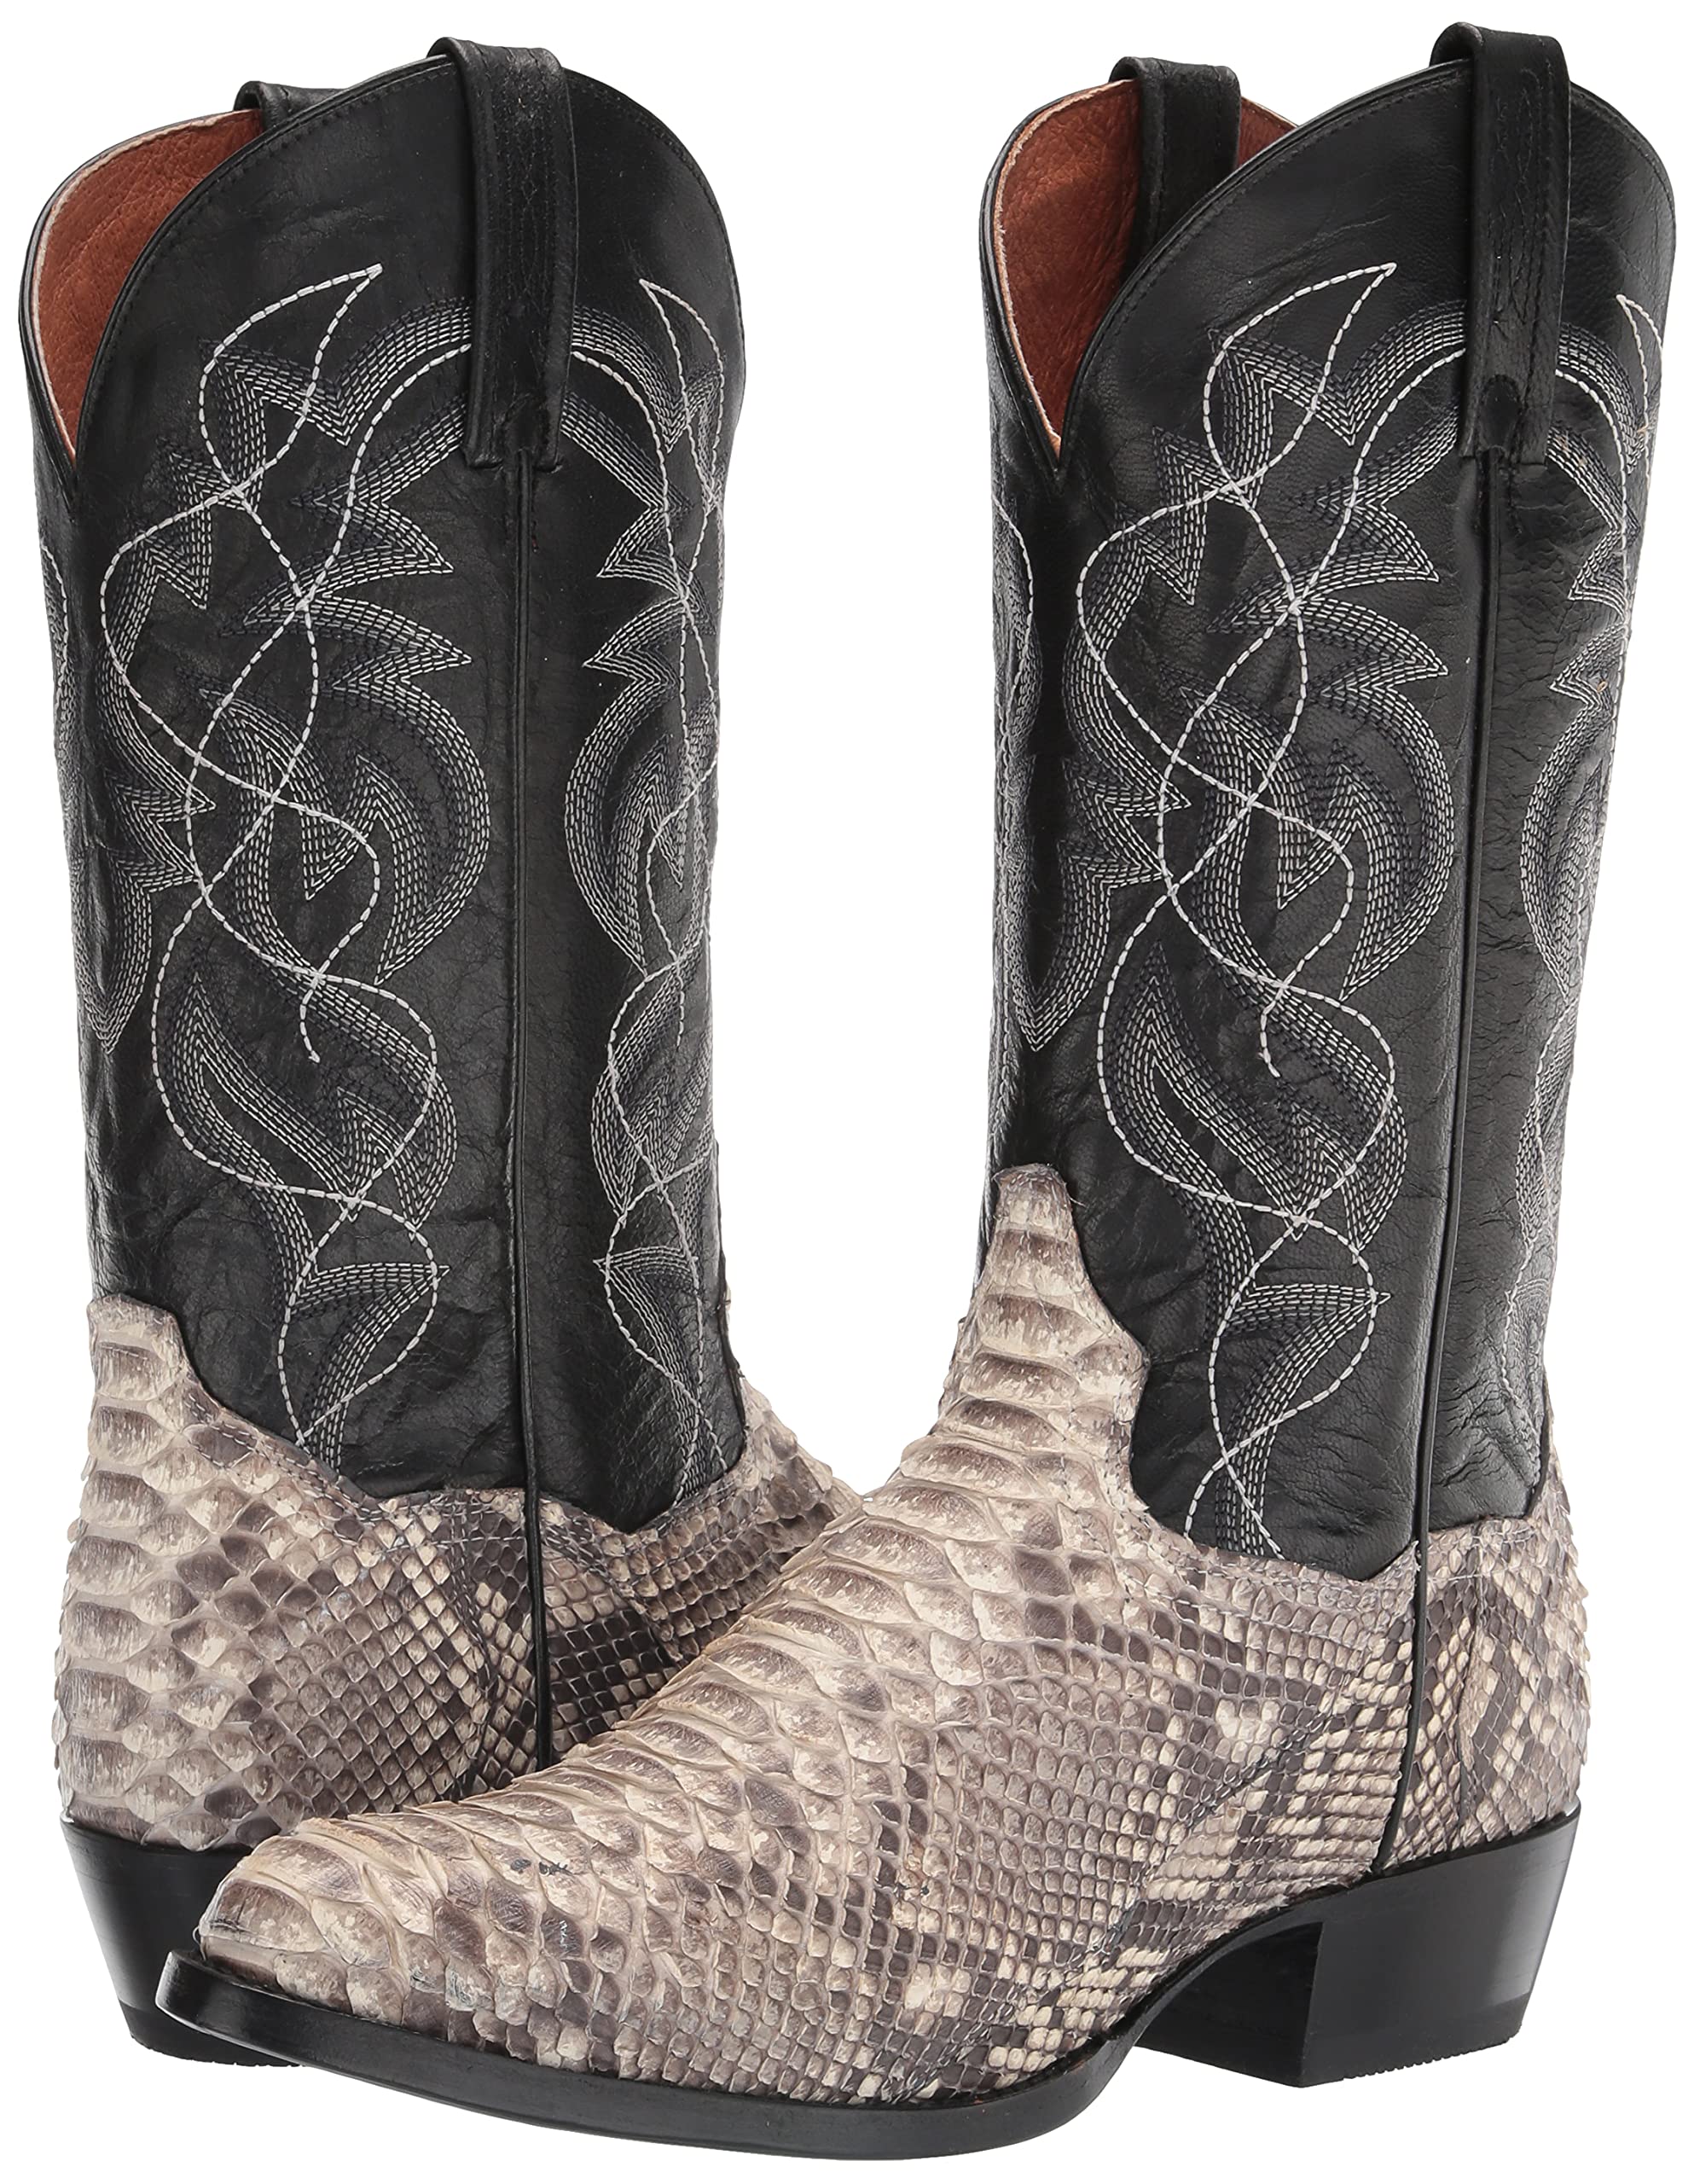 Dan Post Boots Mens Manning Snakeskin Round Toe Boots Mid Calf - Black